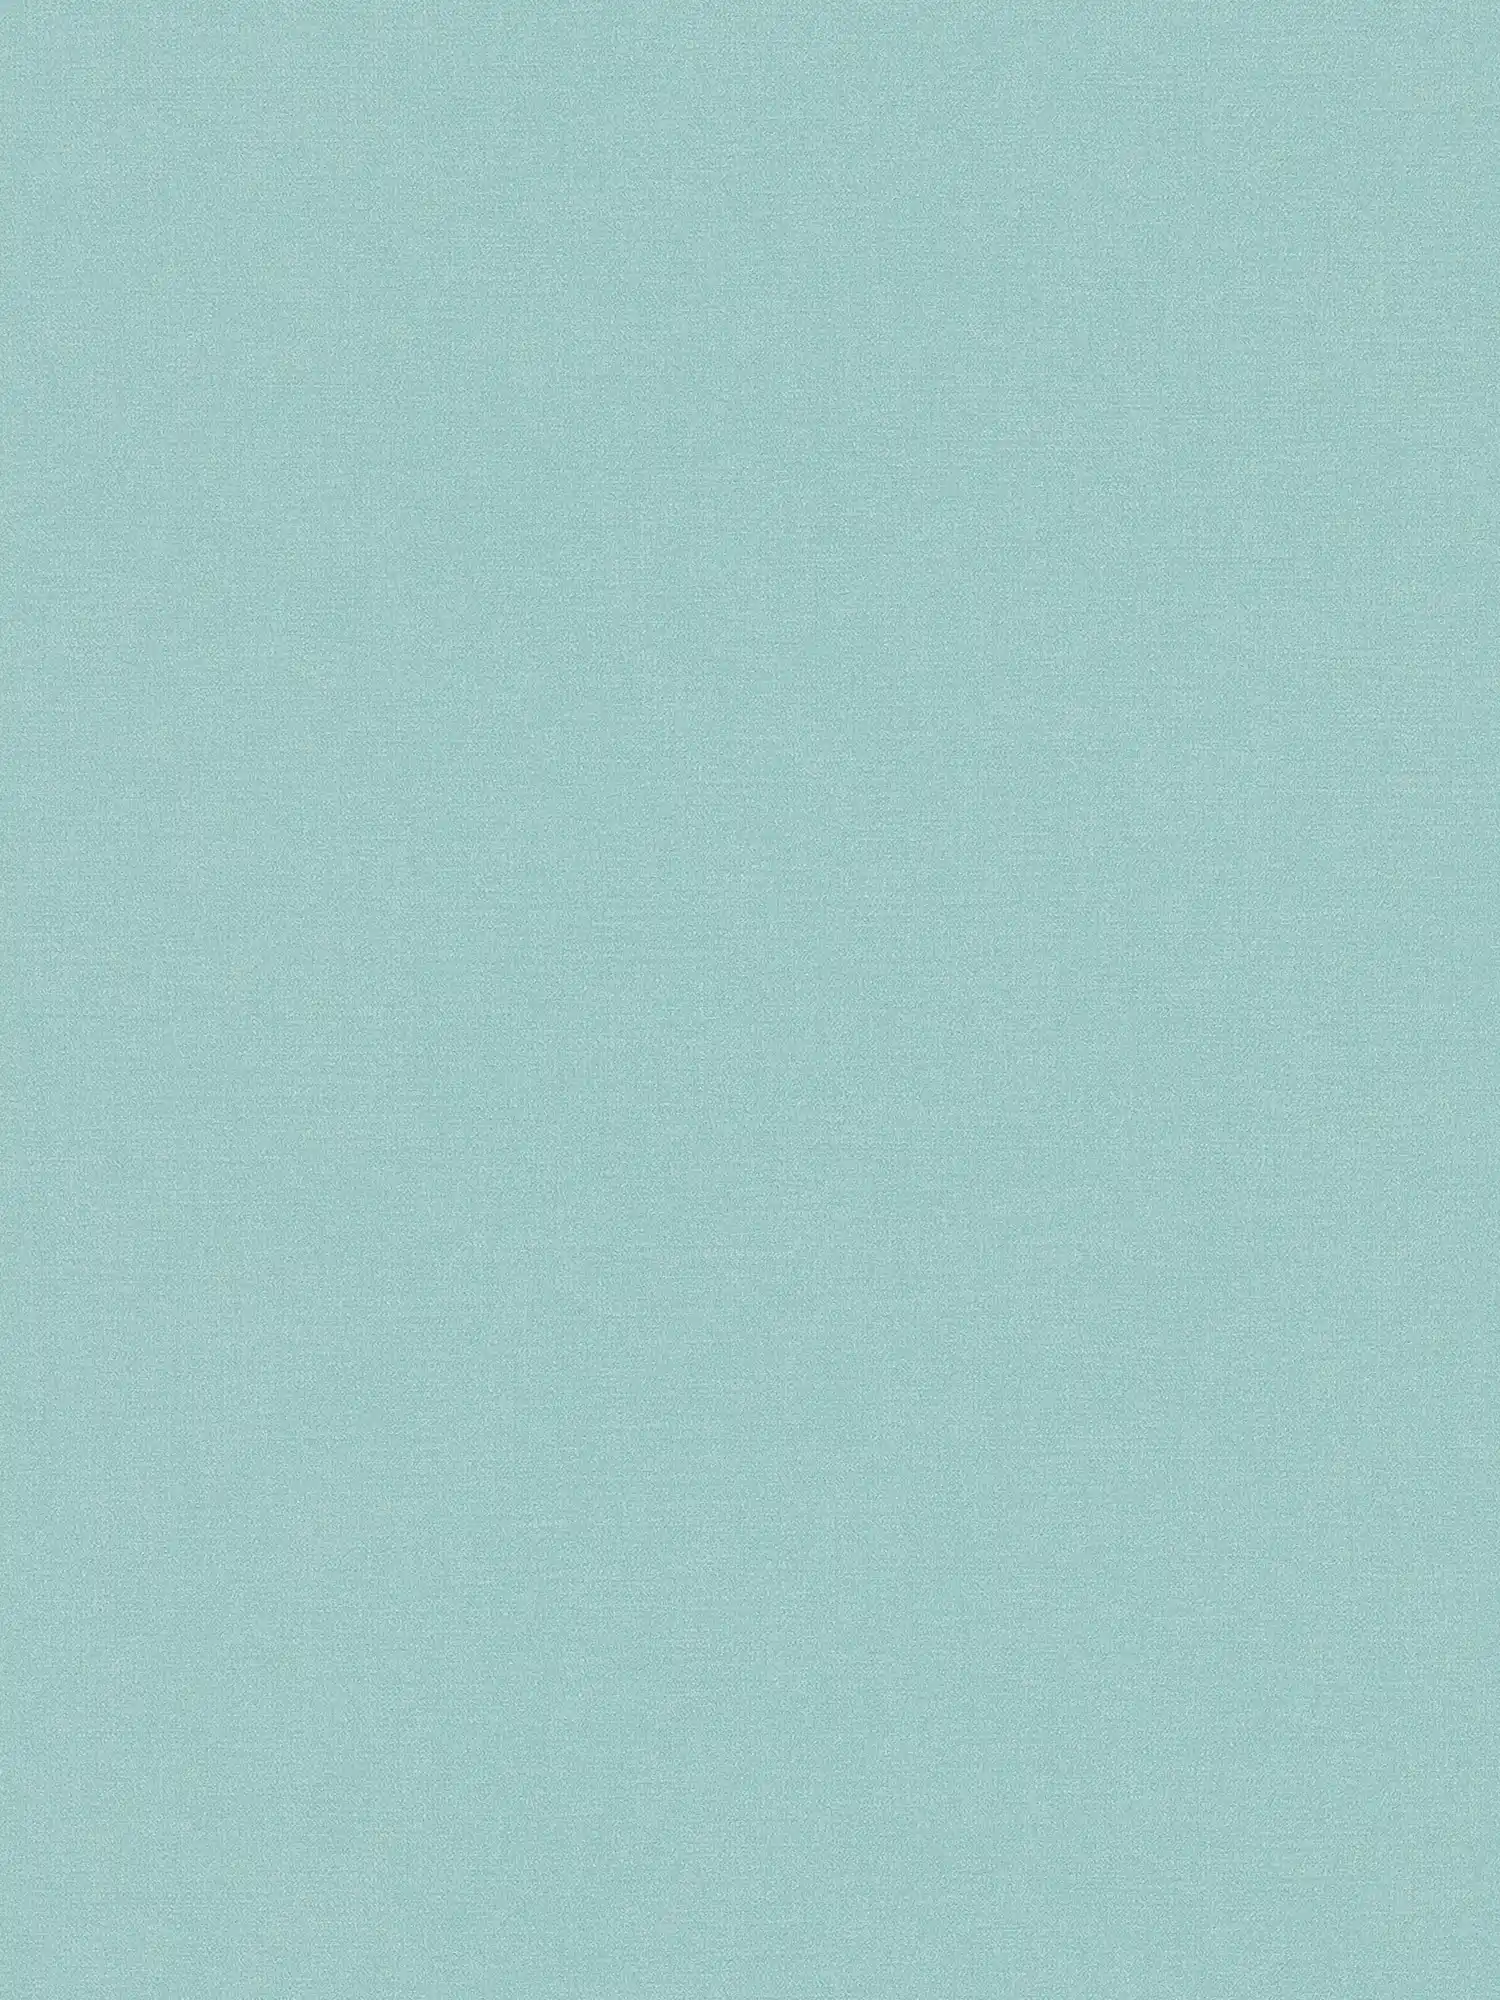 Plain non-woven wallpaper in maritime look - turquoise
